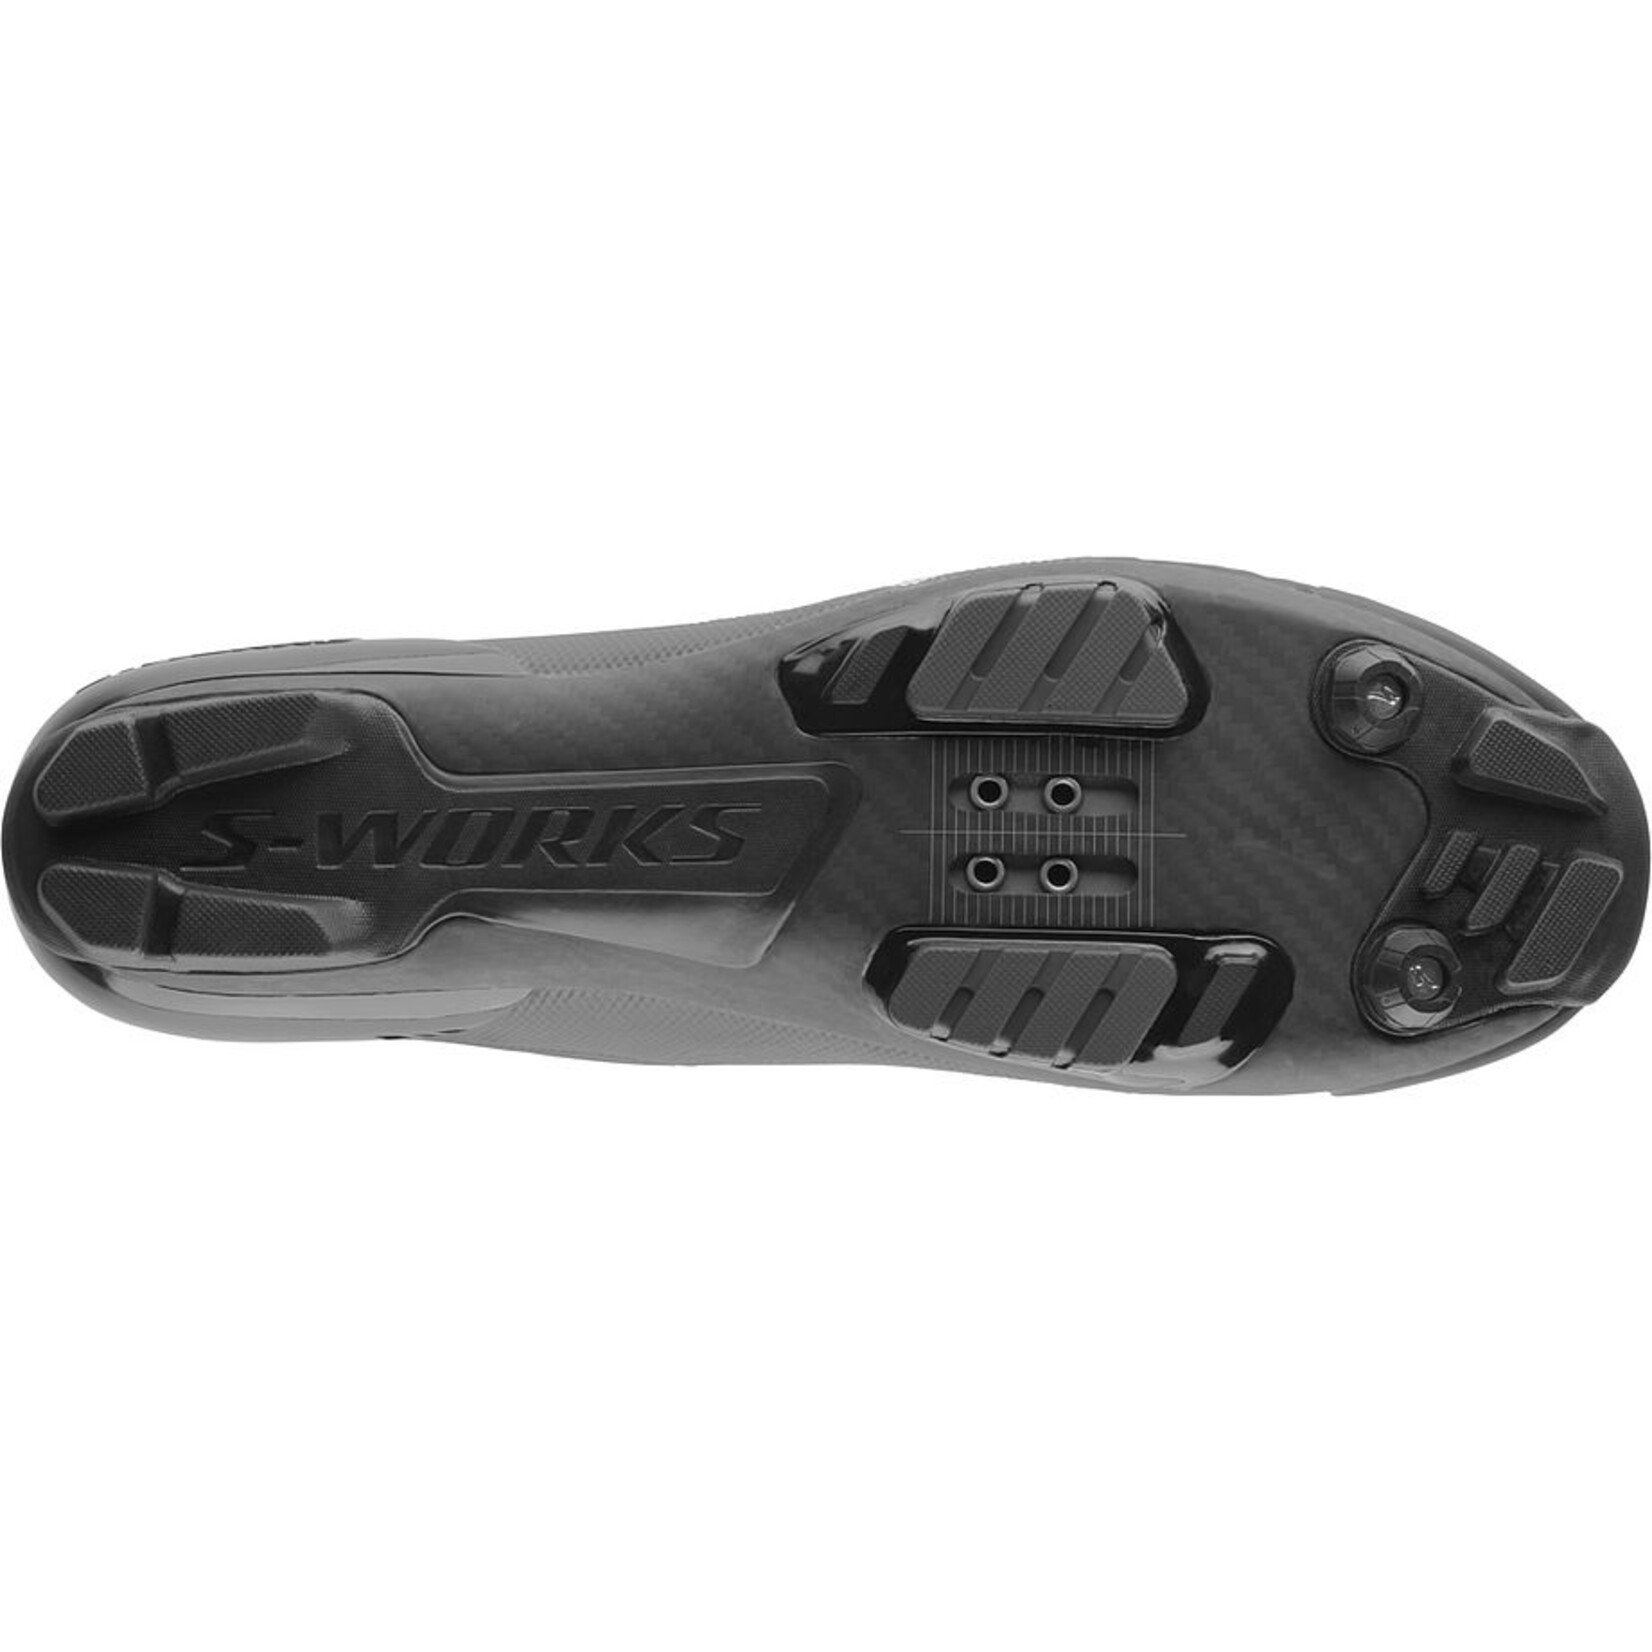 Specialized S-Works Recon Mountain Bike Shoes in Black